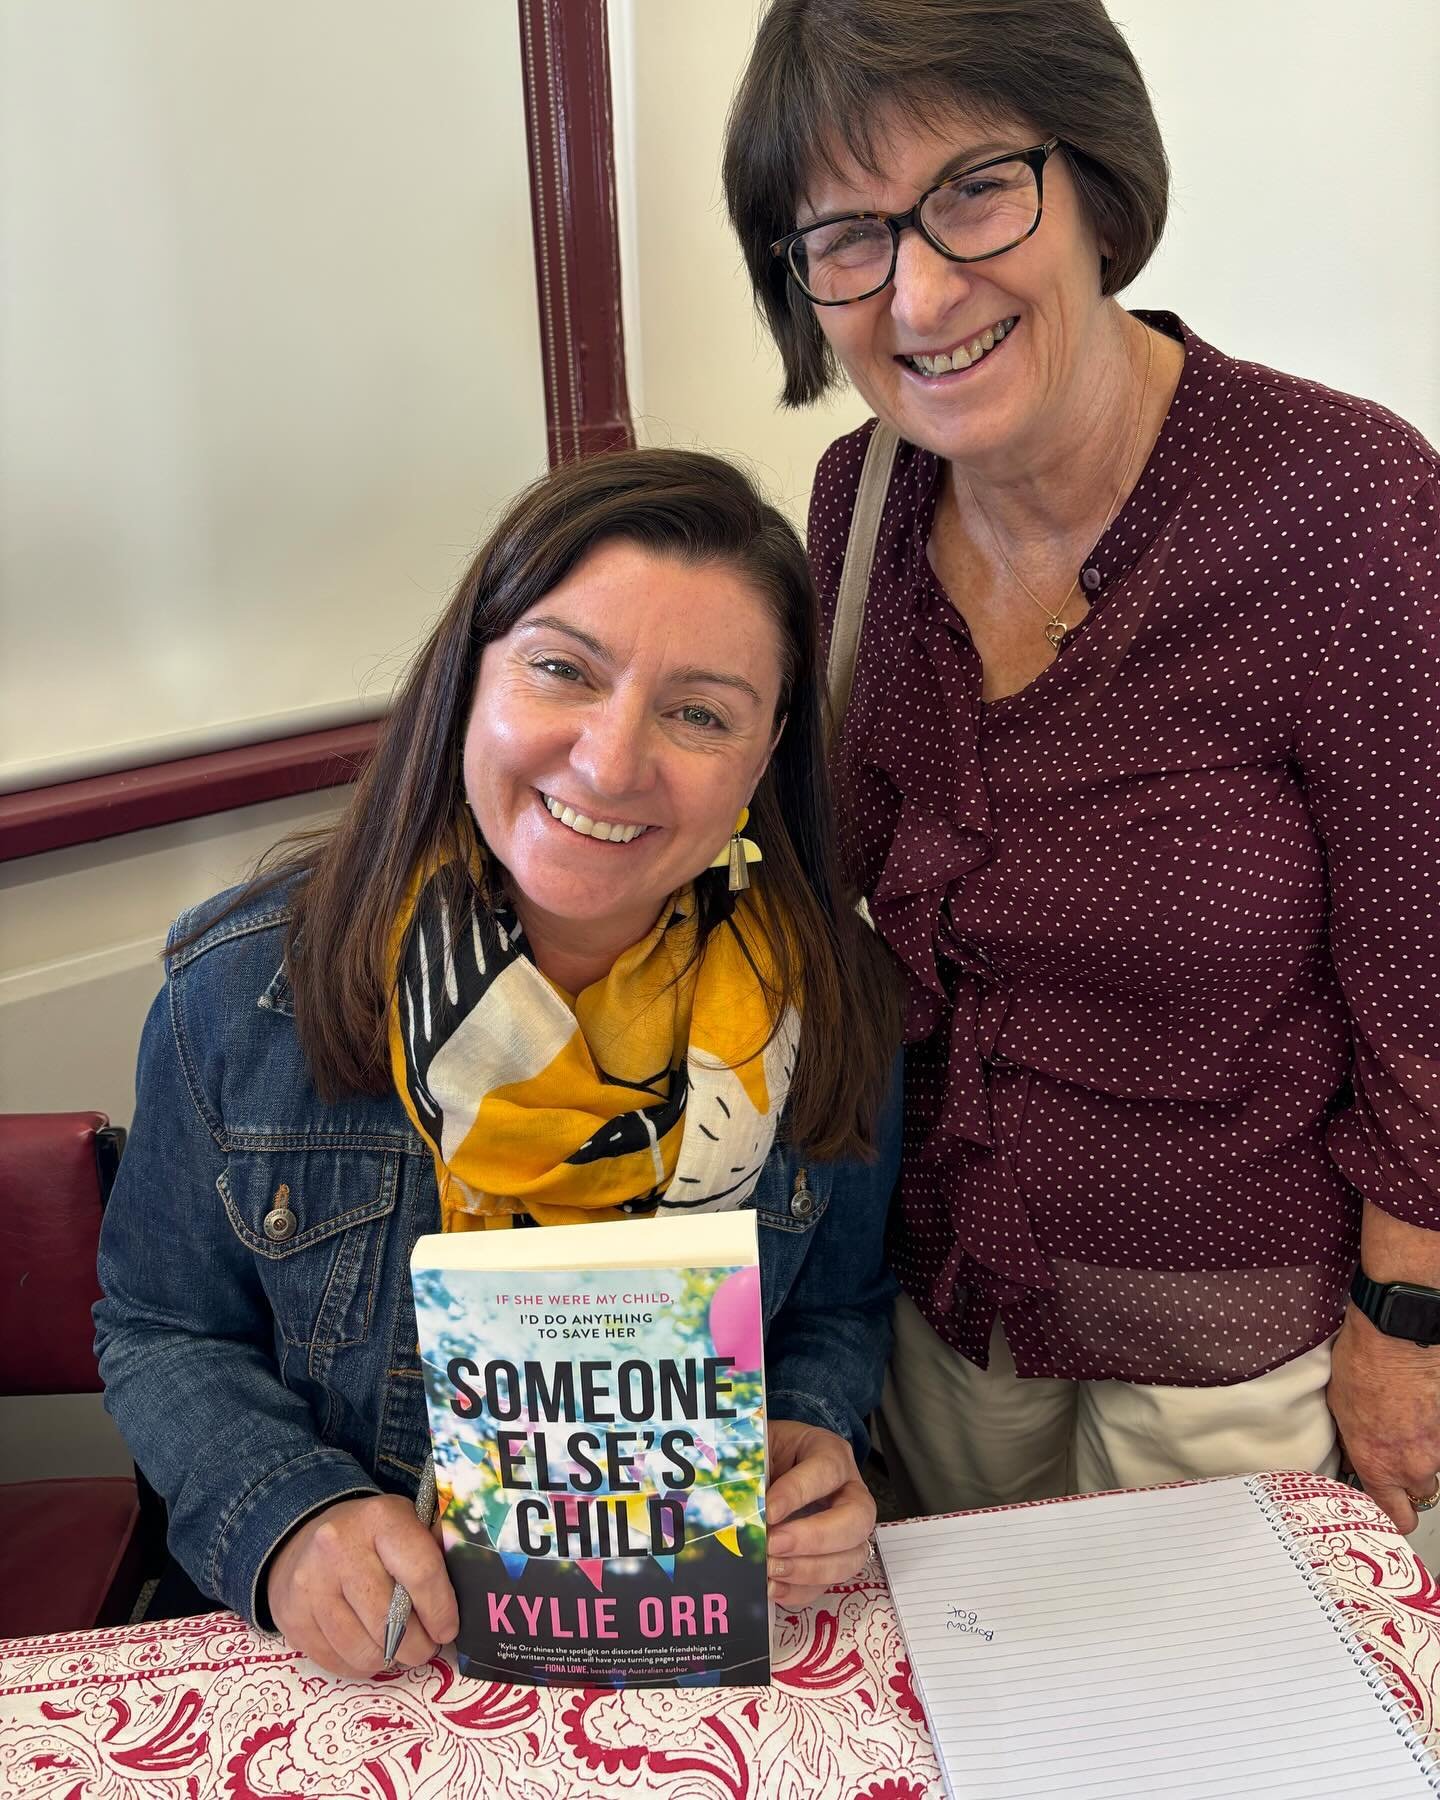 So wonderful to meet @kylieorr_writer this morning. Such an entertaining discussion between her and fellow author @shelleyburrwrites